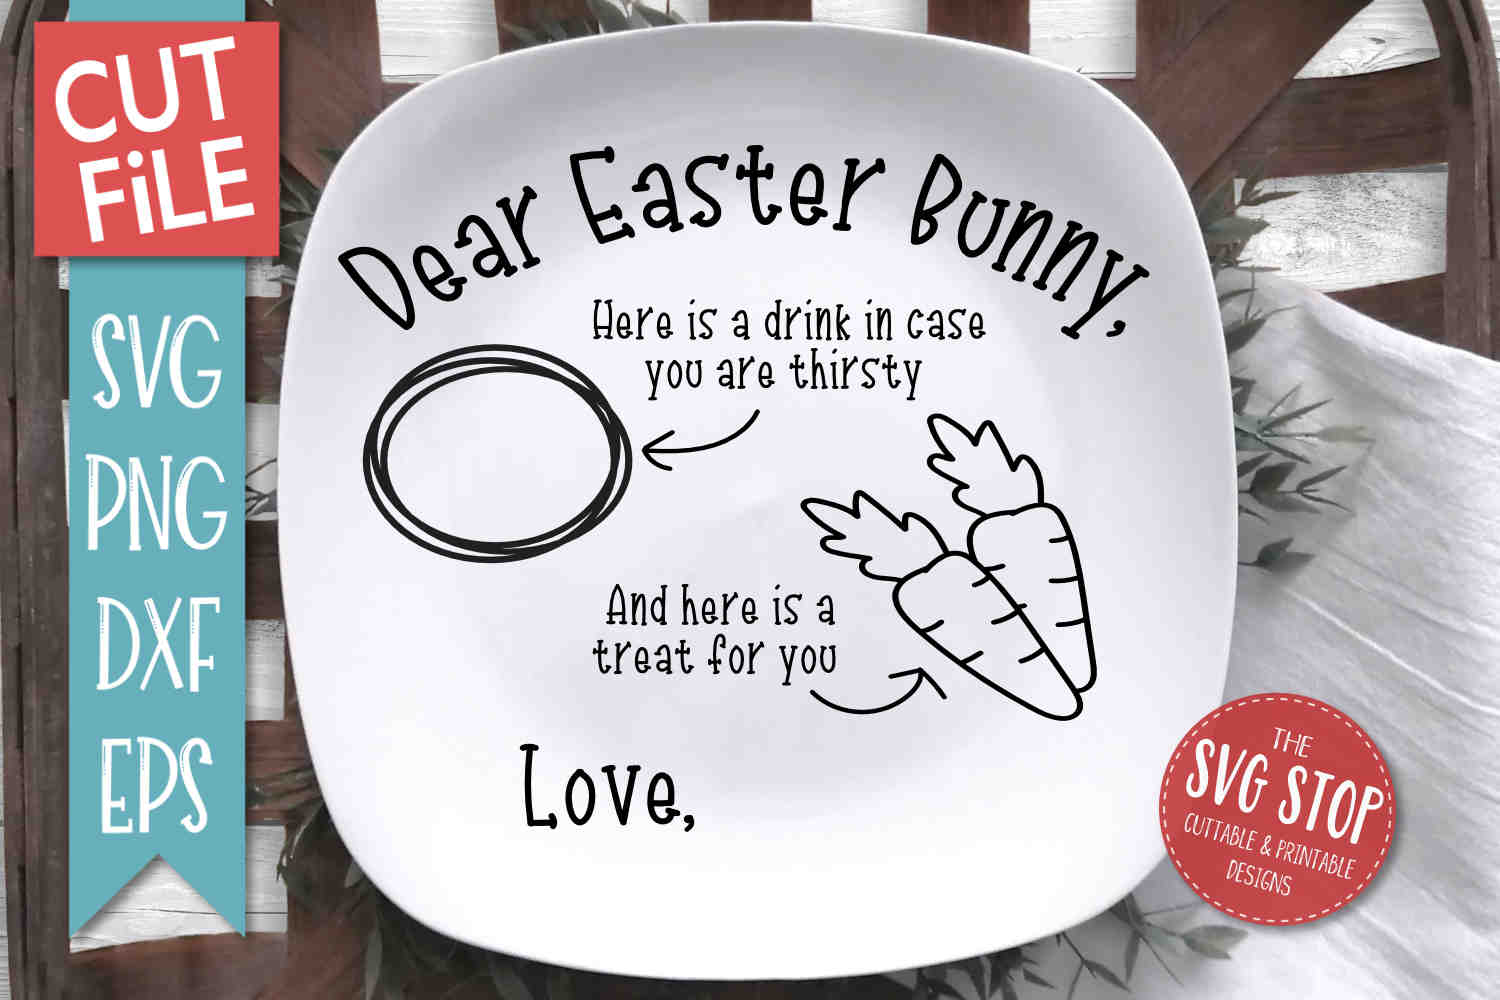 Easter Bunny Plate SVG, PNG, DXF, EPS